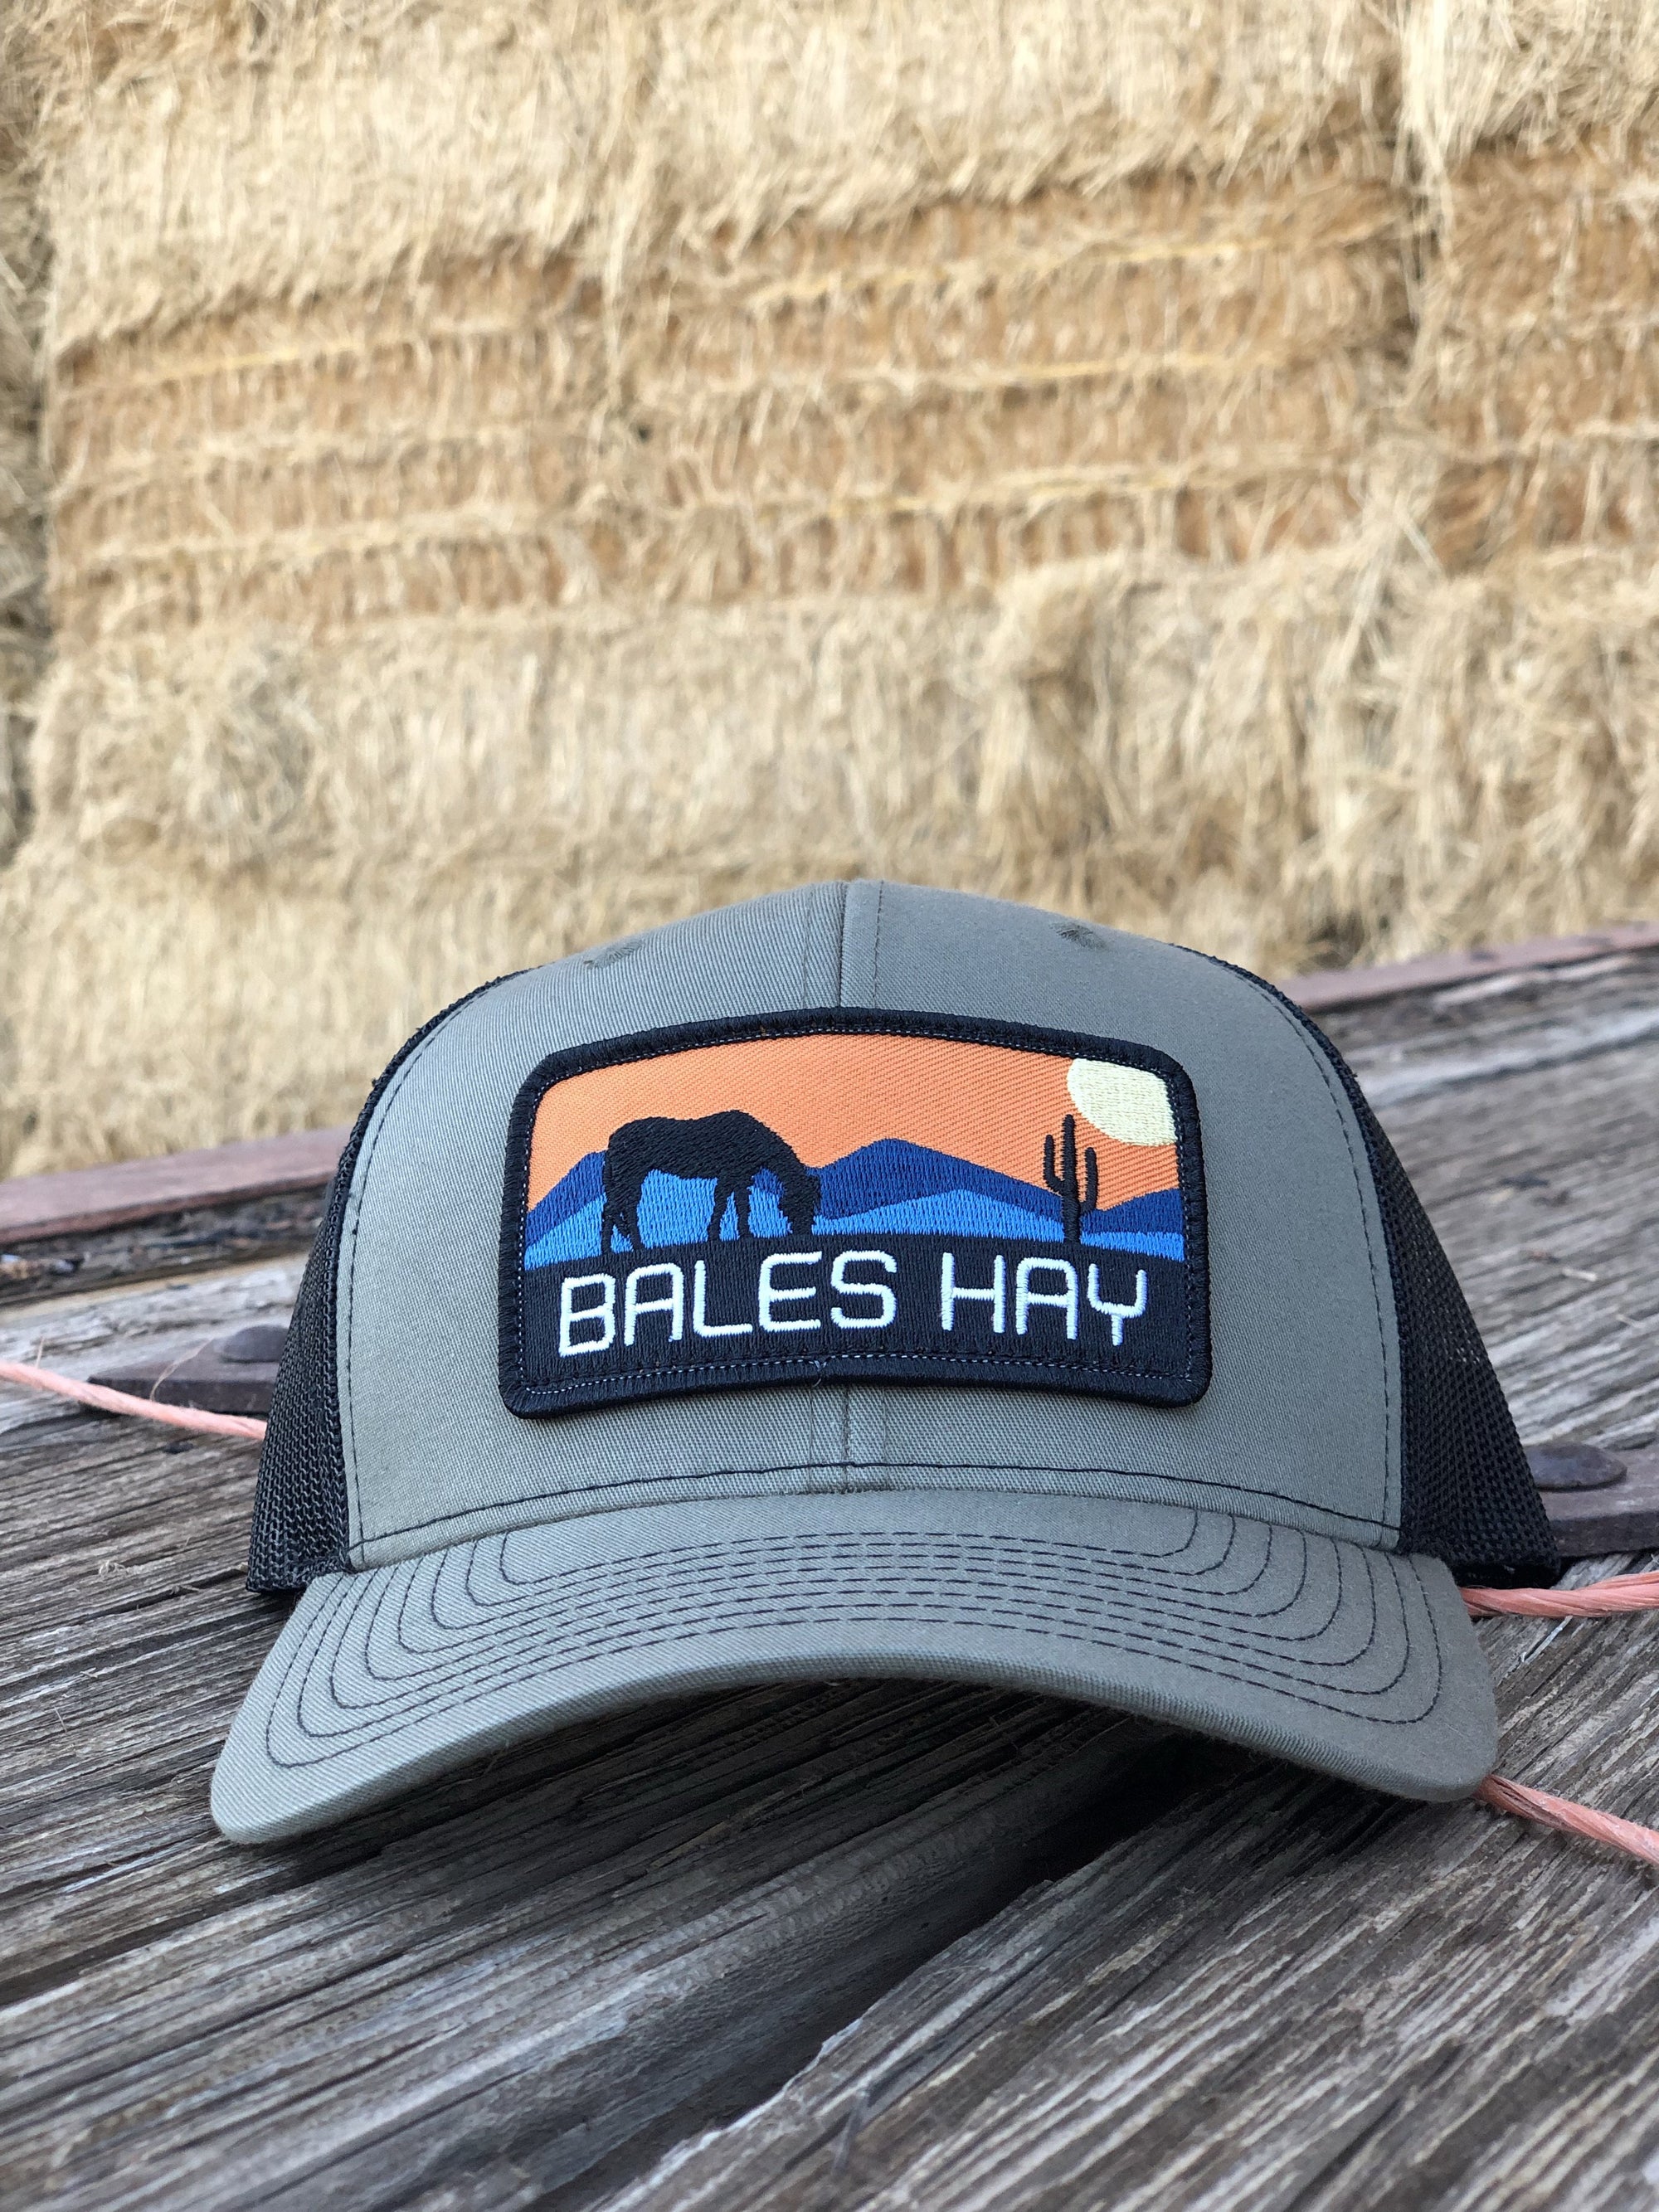 This hat is both well-made and comfortable to wear that features the first patch we ever designed! It represents the horses we feed, and the landscape we live in.  